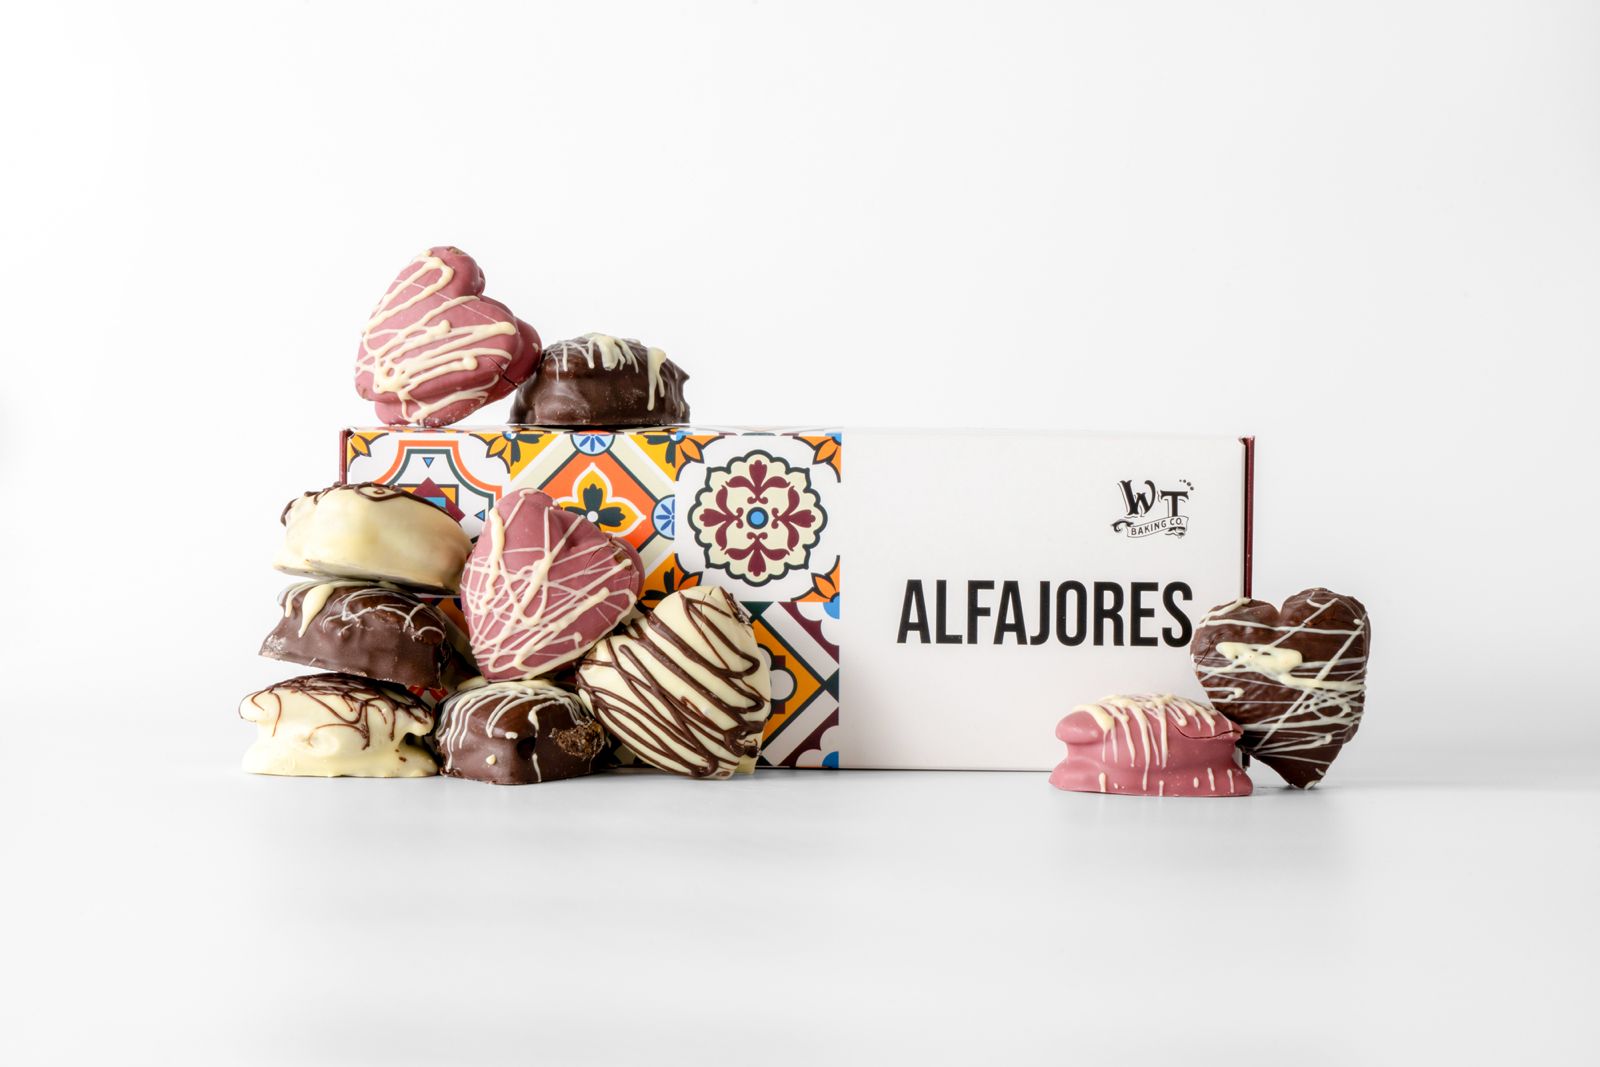 Chocolate Alfajores Argentinos - Cocoa Shortbread and Sandwich Cookies  Dipped in Semisweet Chocolate - Wooden Table Baking Company Gourmet Set Of  4